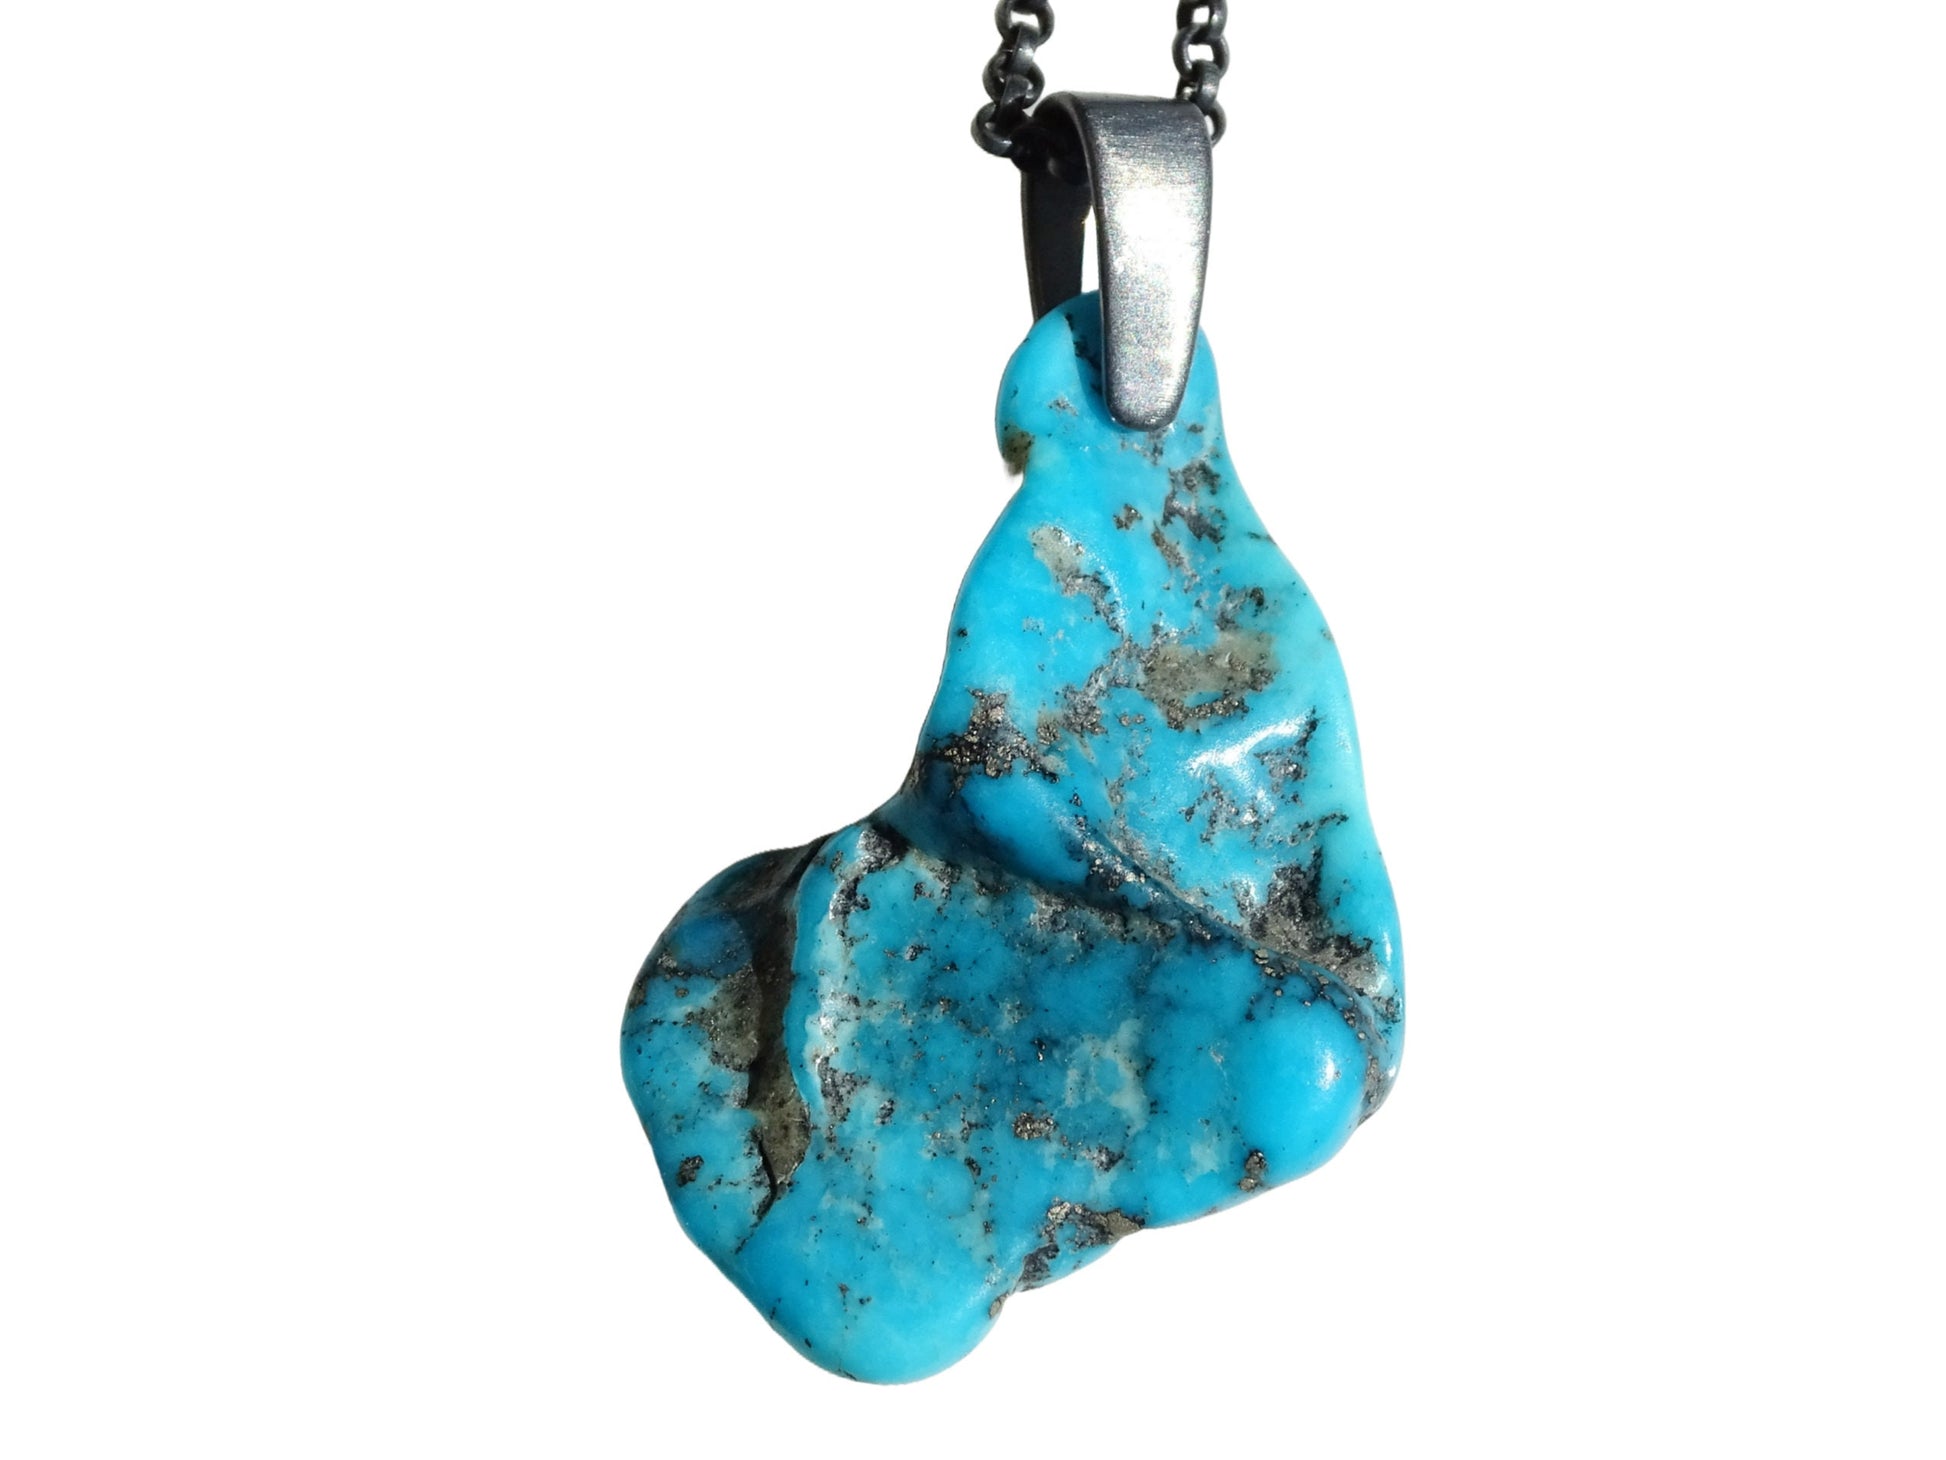 real Bisbee turquoise nugget pendant, rare turquoise pyrite pendant black silver, raw turquoise men's necklace, unique gift for him - CrazyAss Jewelry Designs